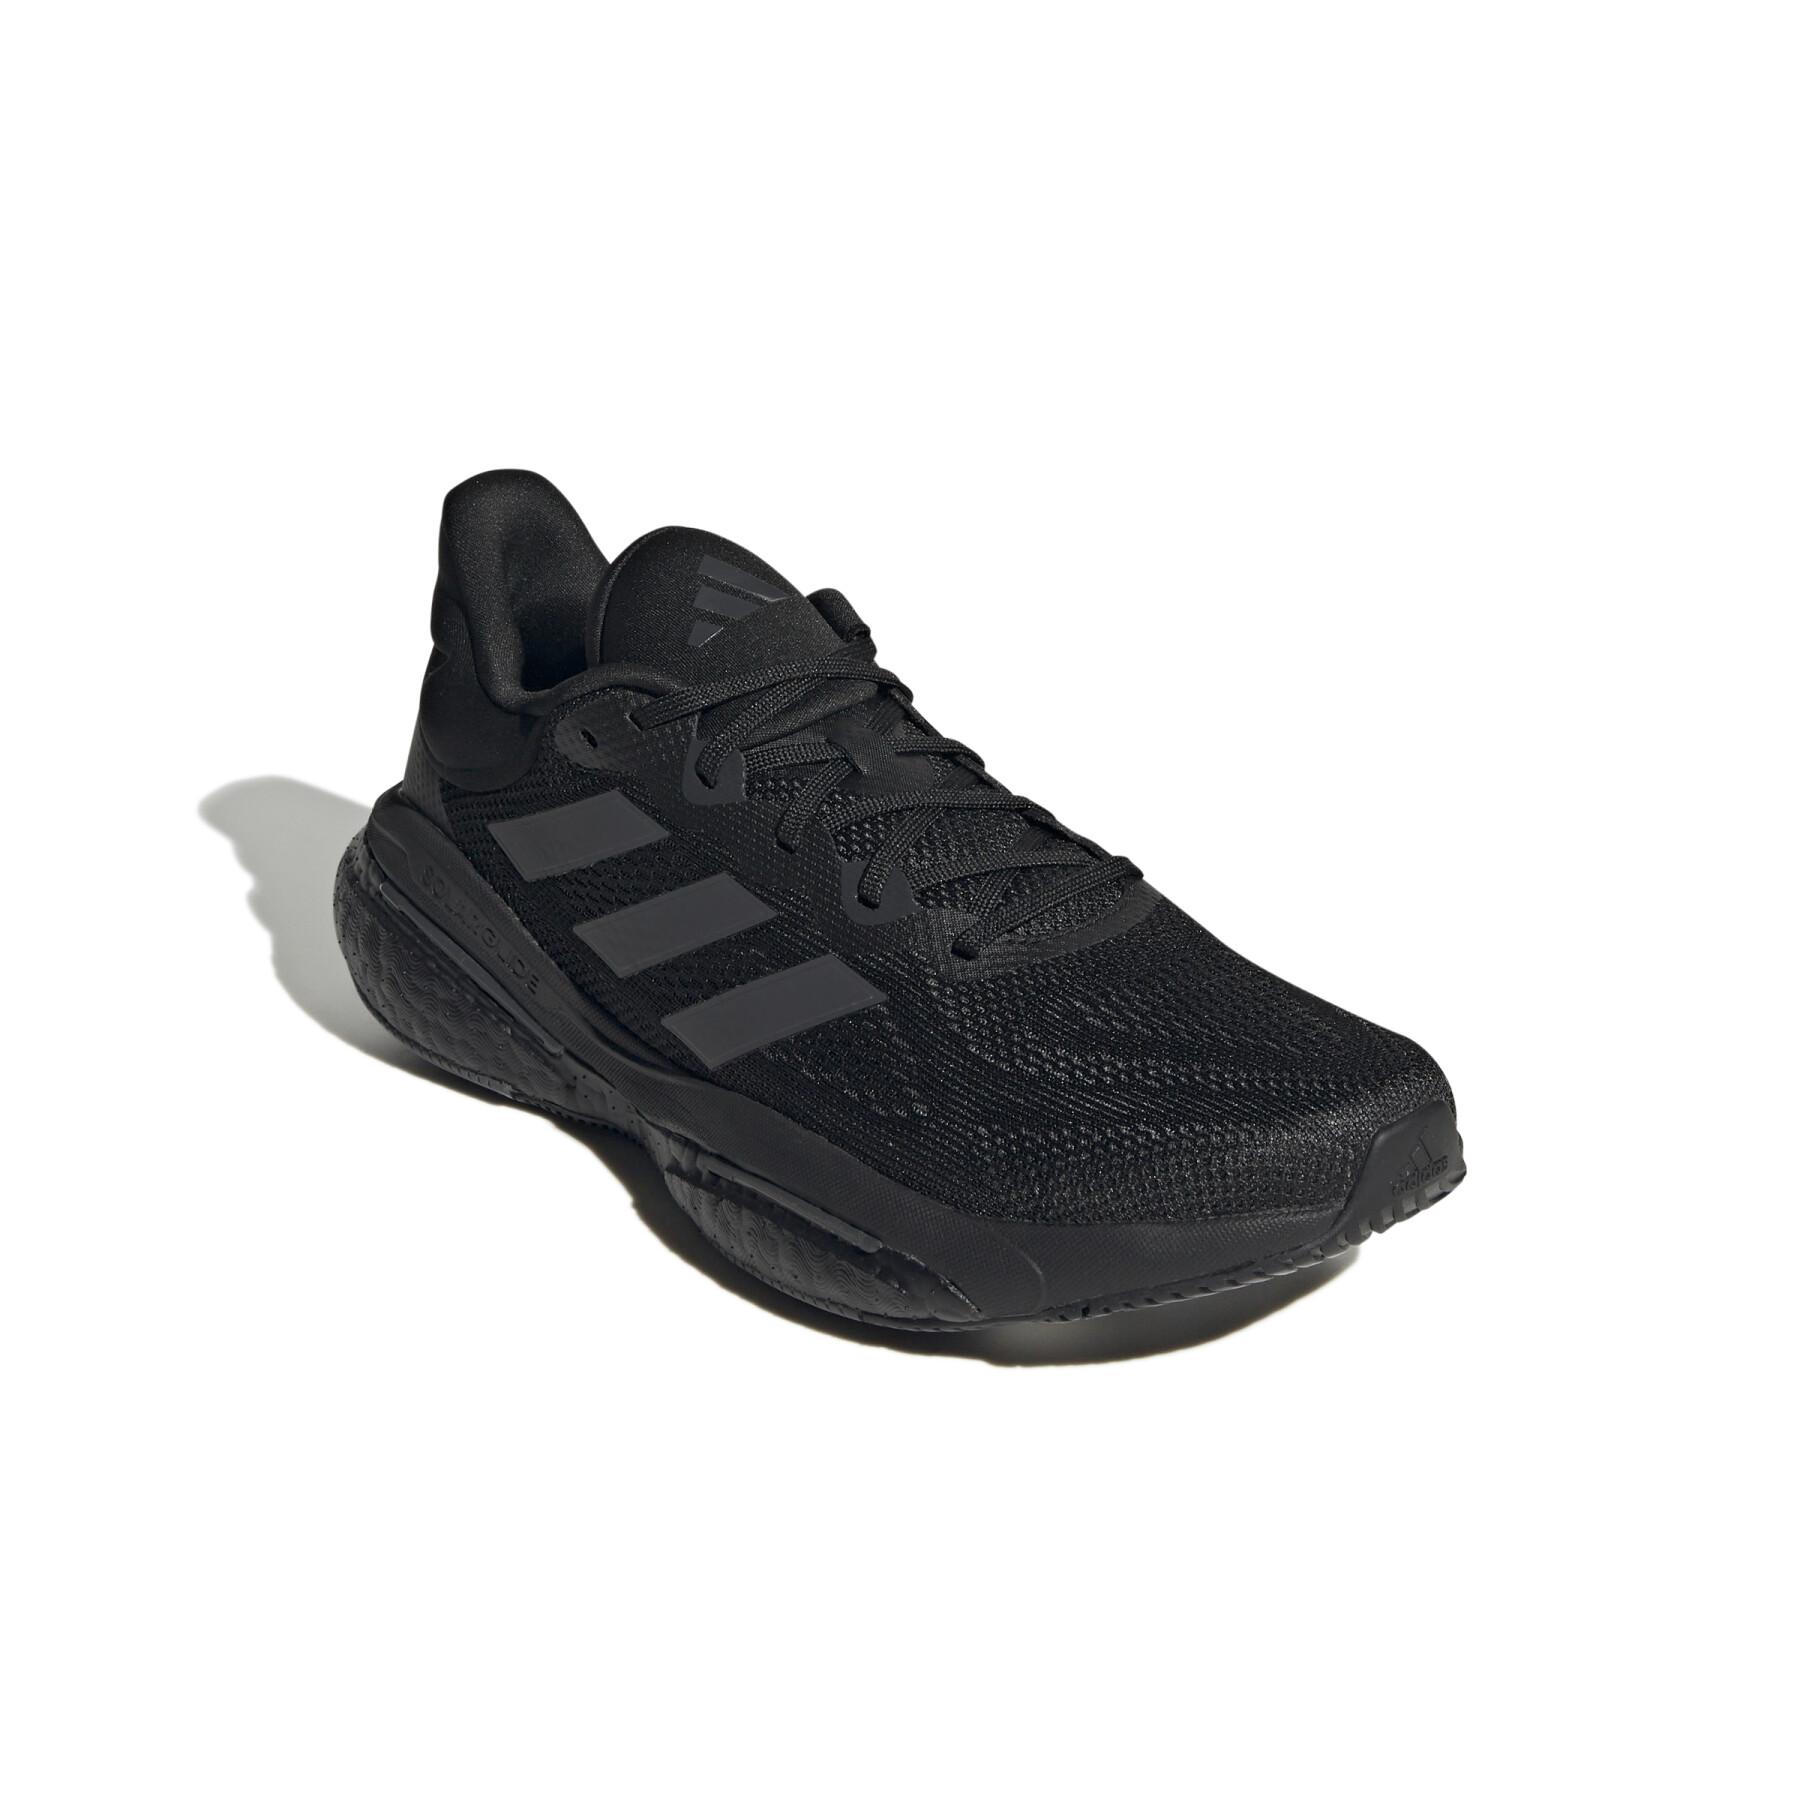 Running shoes adidas Solarglide 6